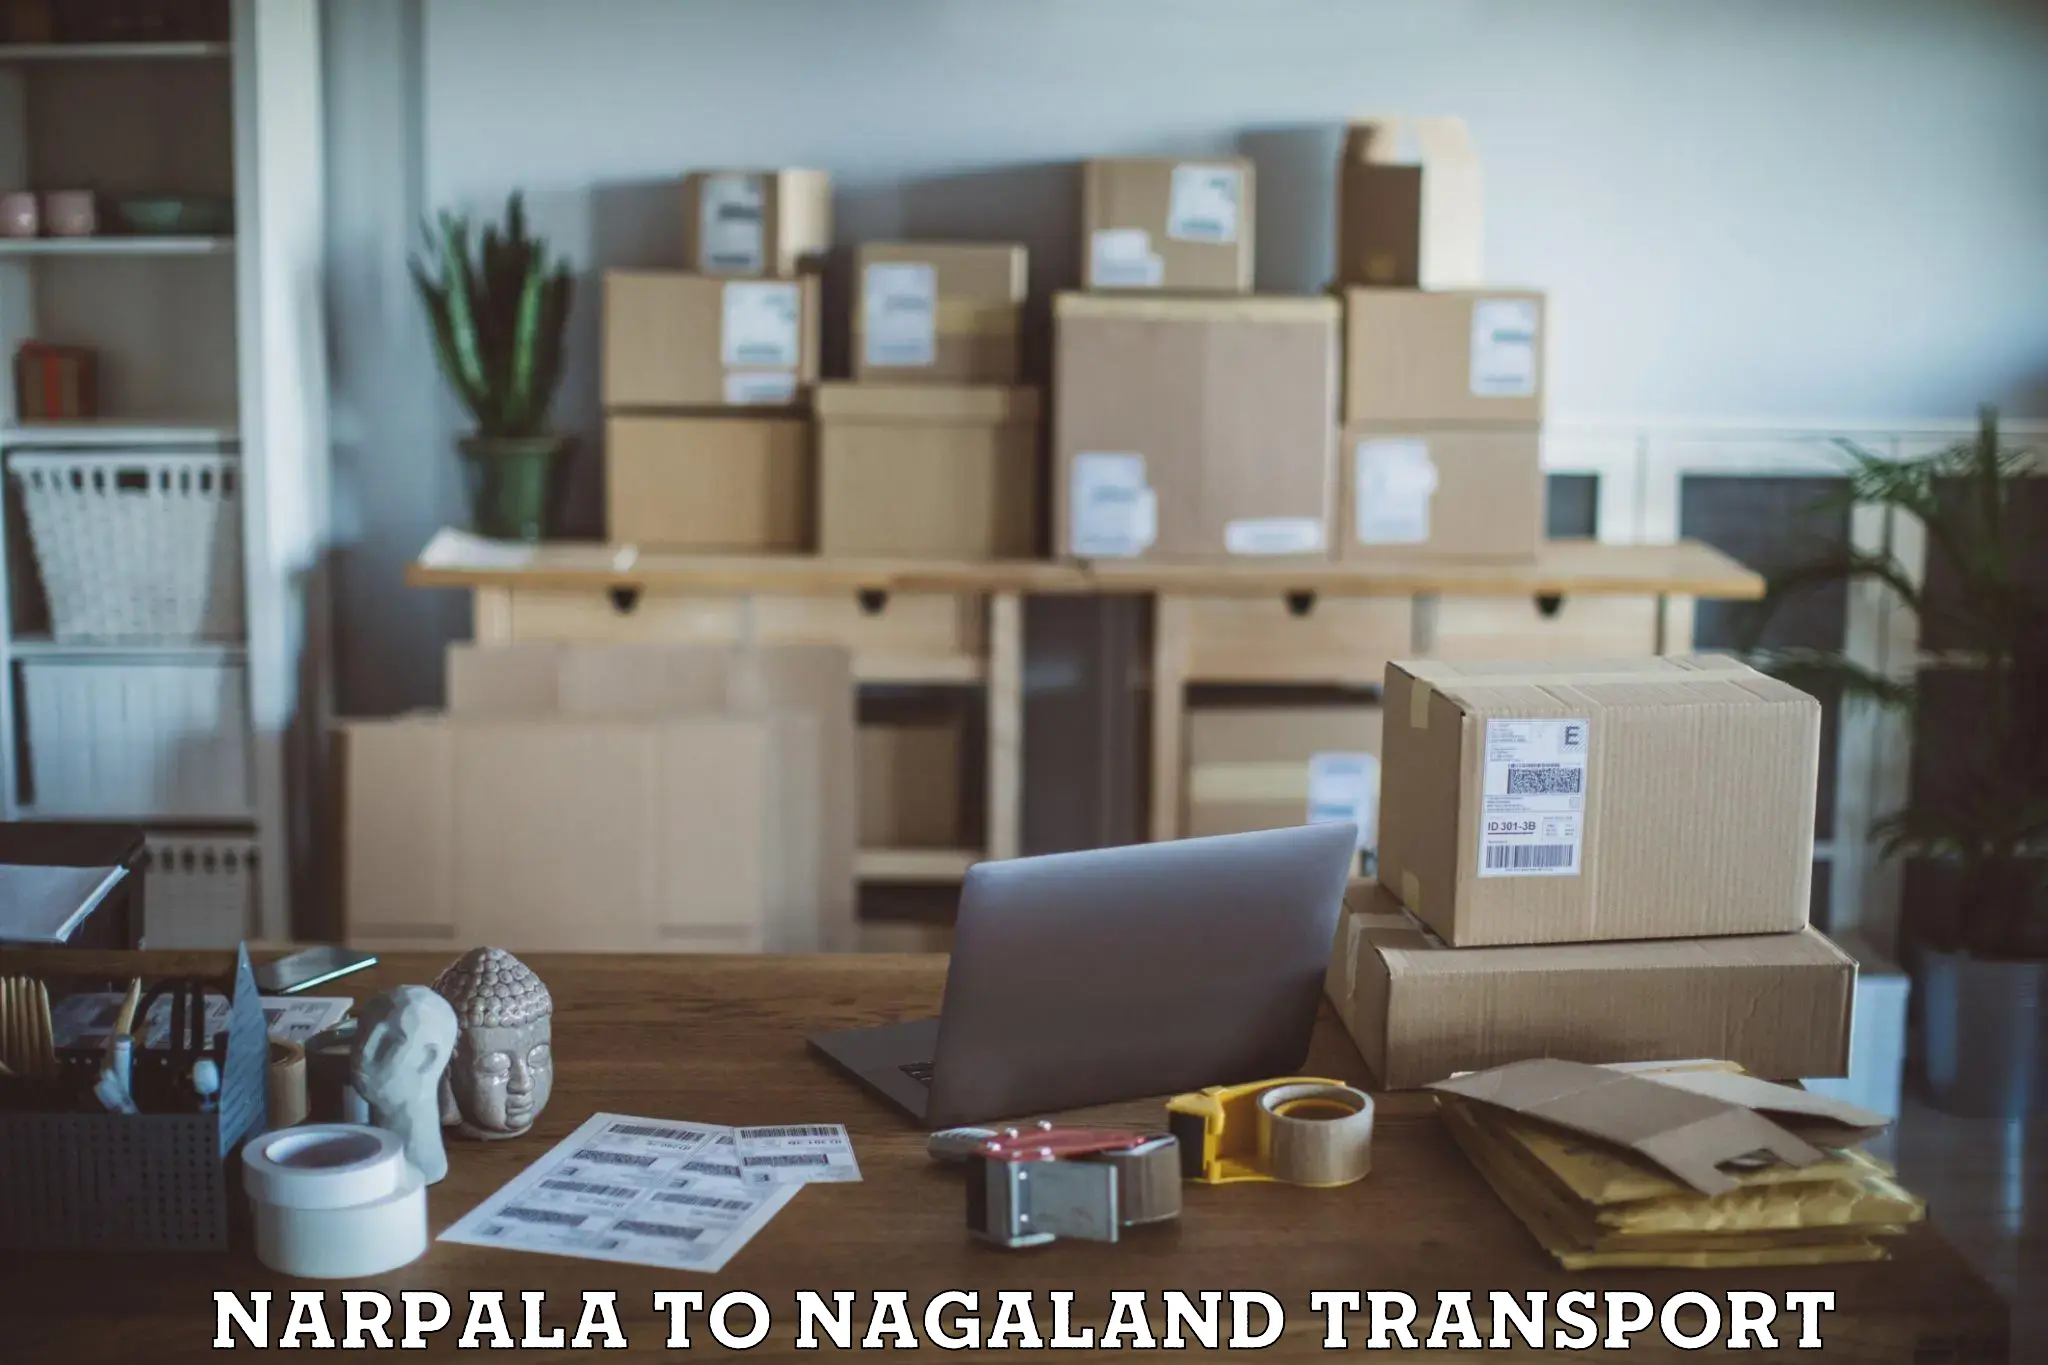 Container transport service Narpala to Nagaland